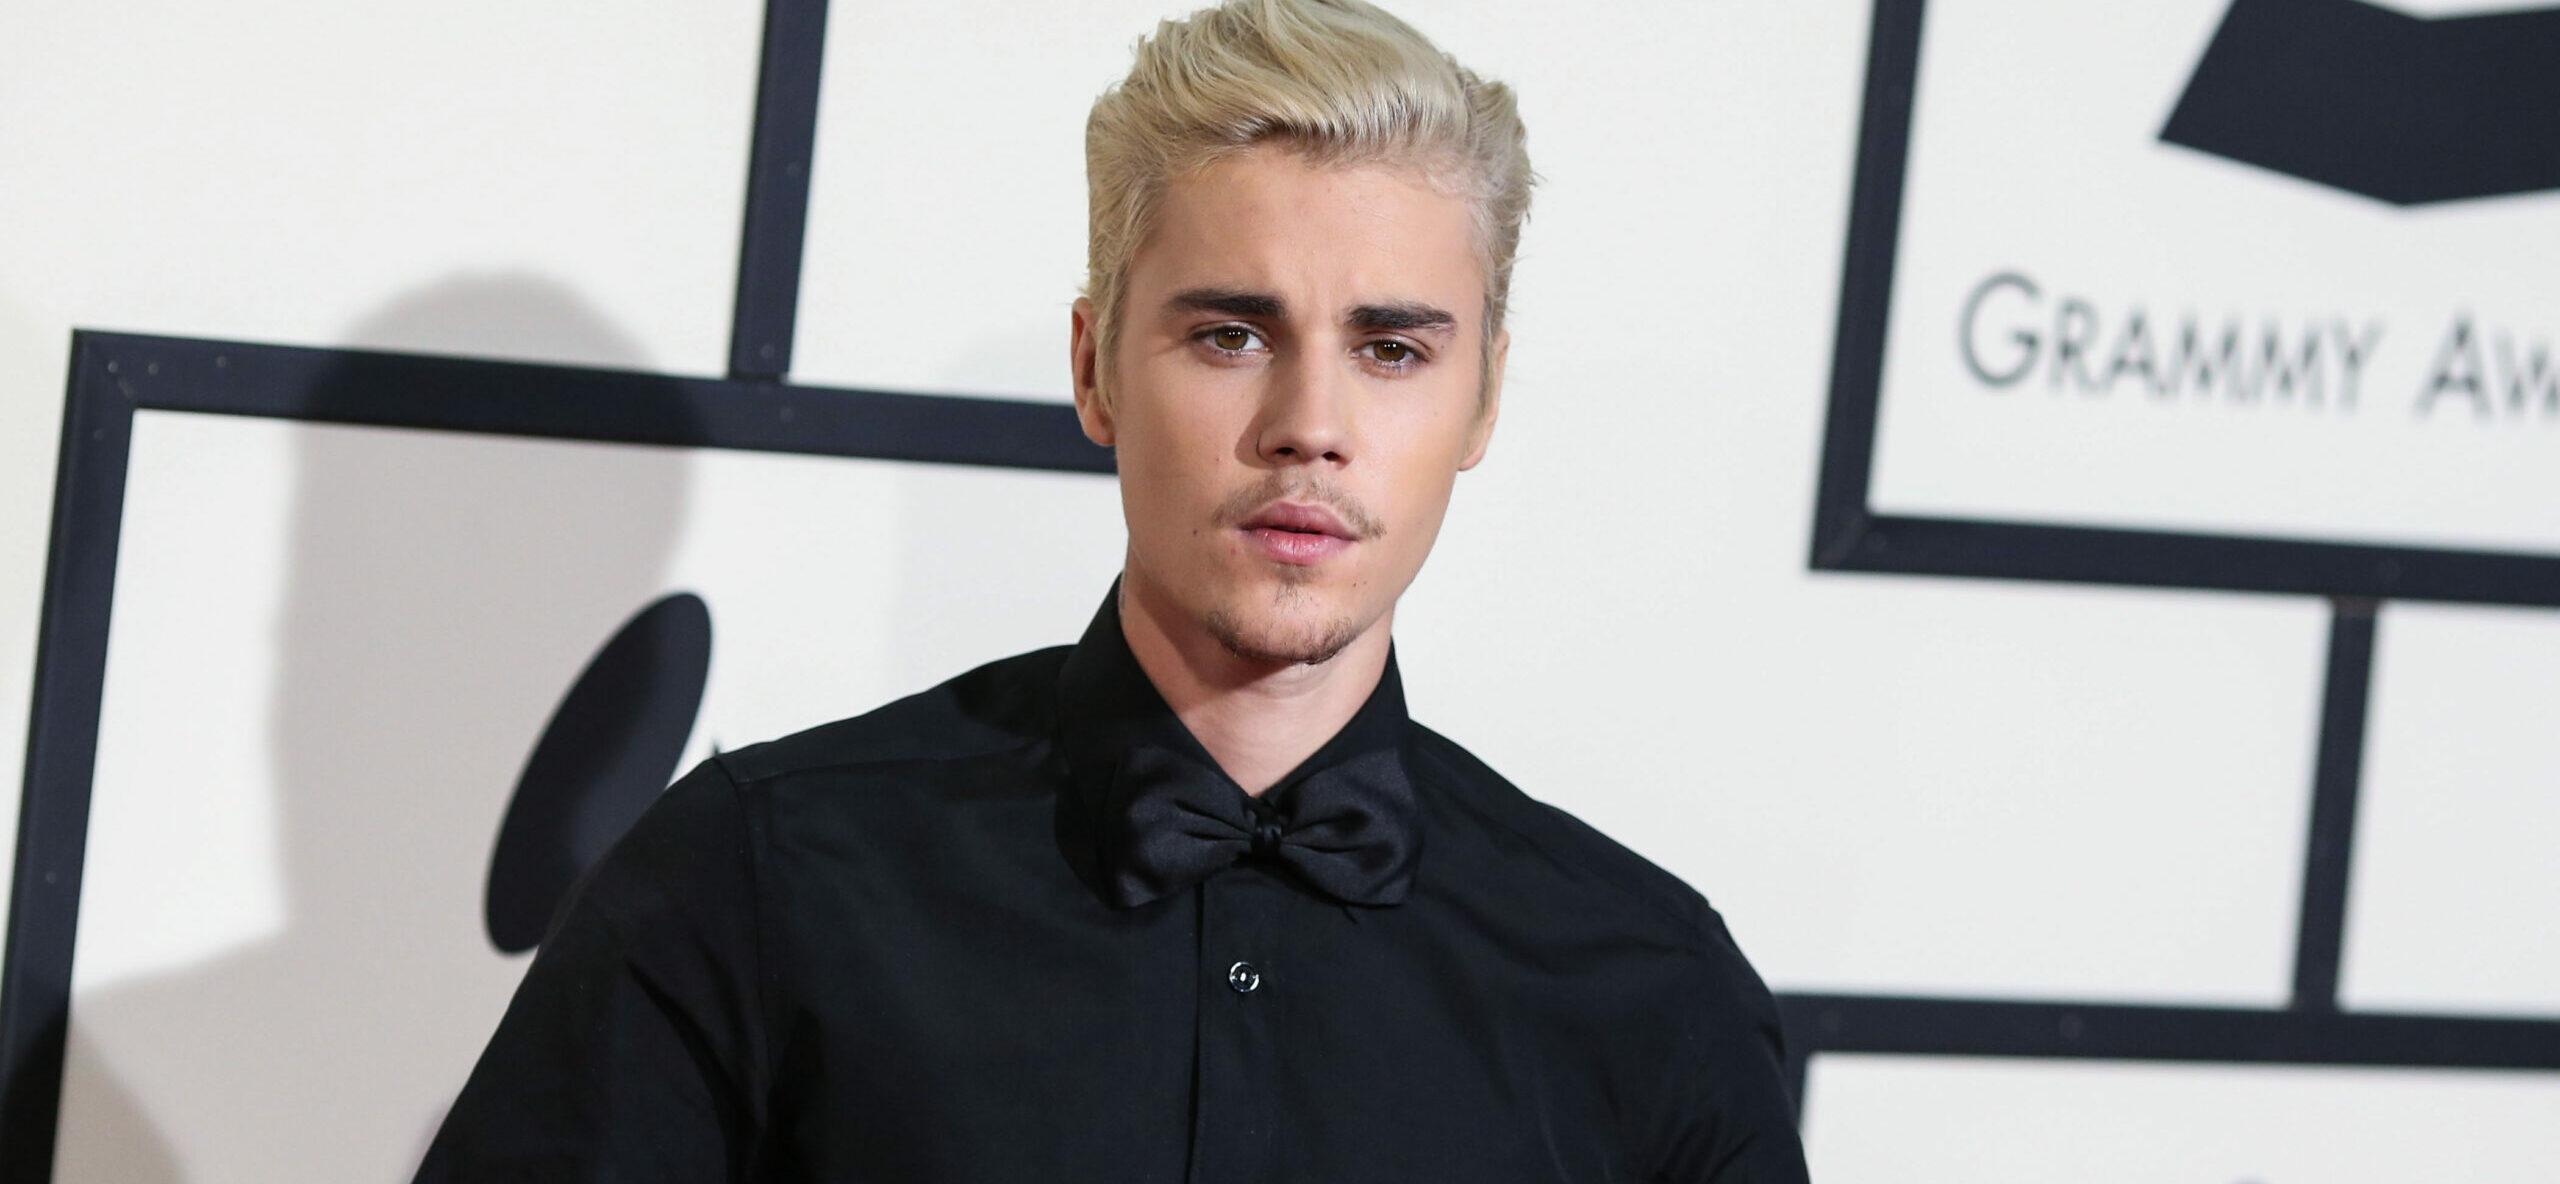 Justin Bieber Has Ramsay Hunt Syndrome… What Does That Mean?